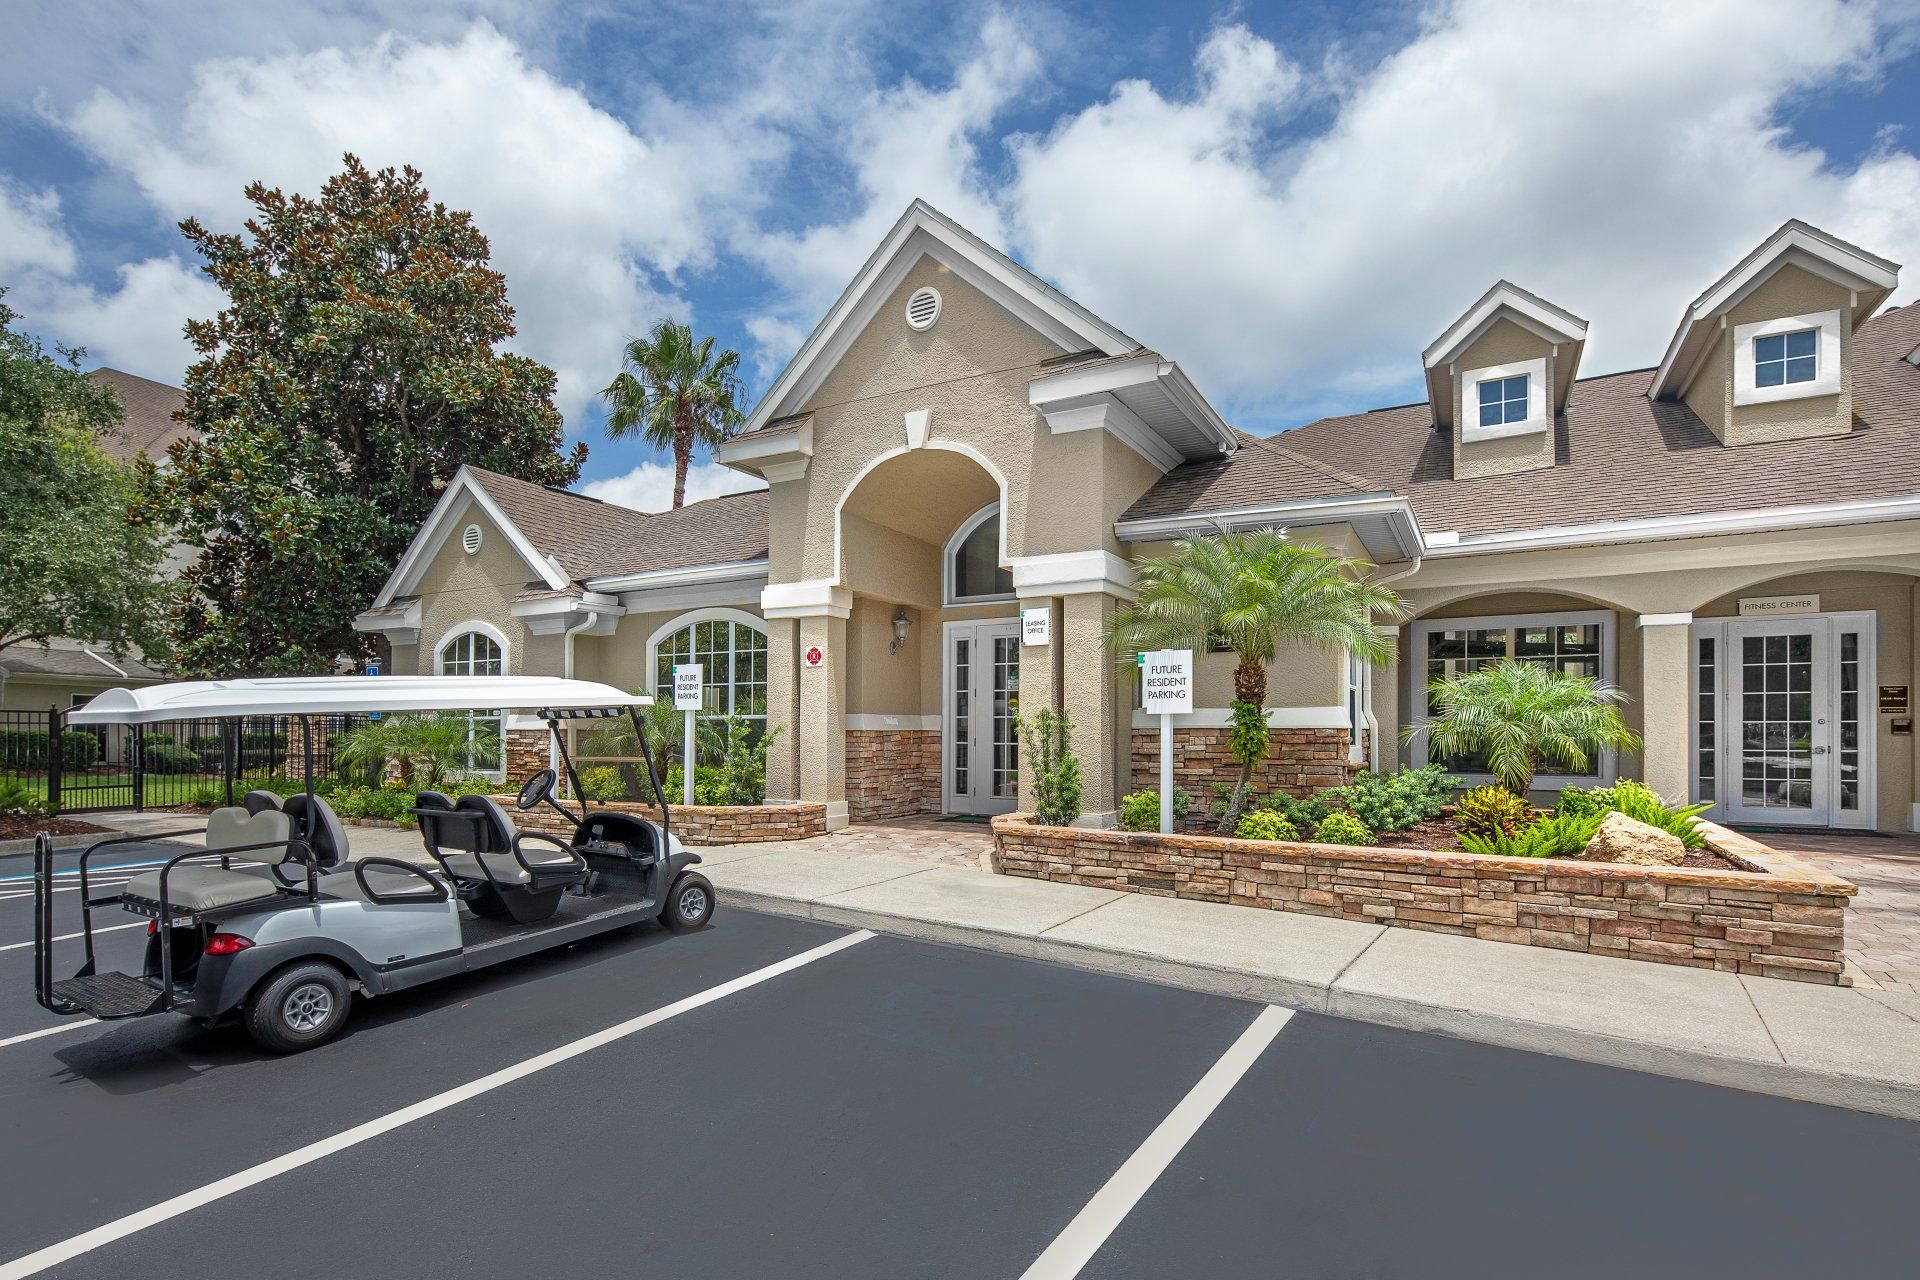 Eddison at Deerwood Park | Leasing Building with Golf Cart Parking in the front